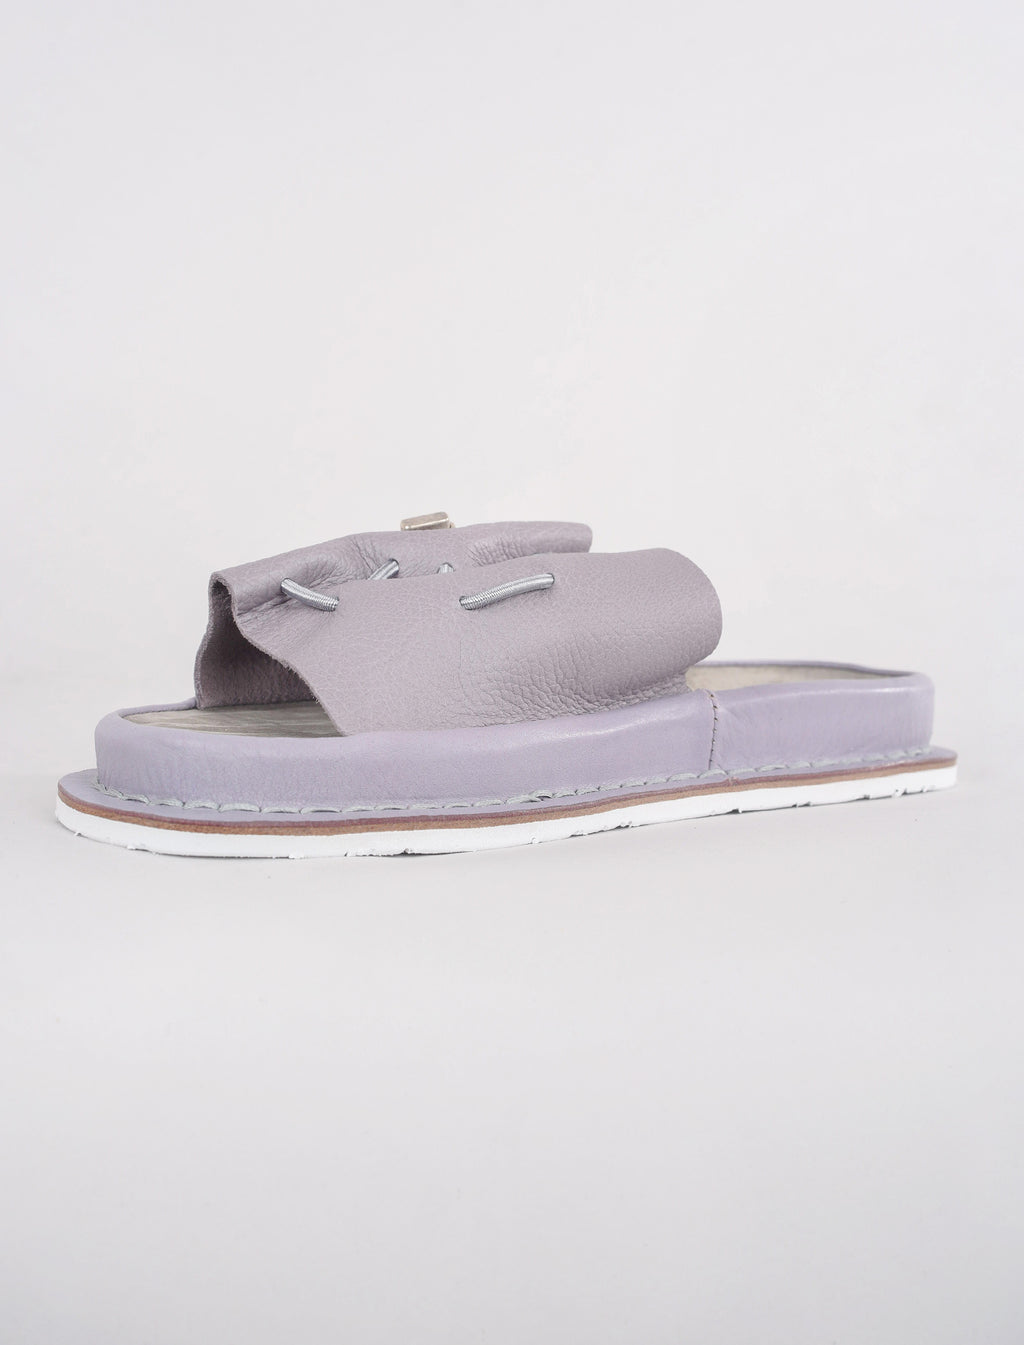 Trippen Shoes Synergy Closed, Pulpo Alba 